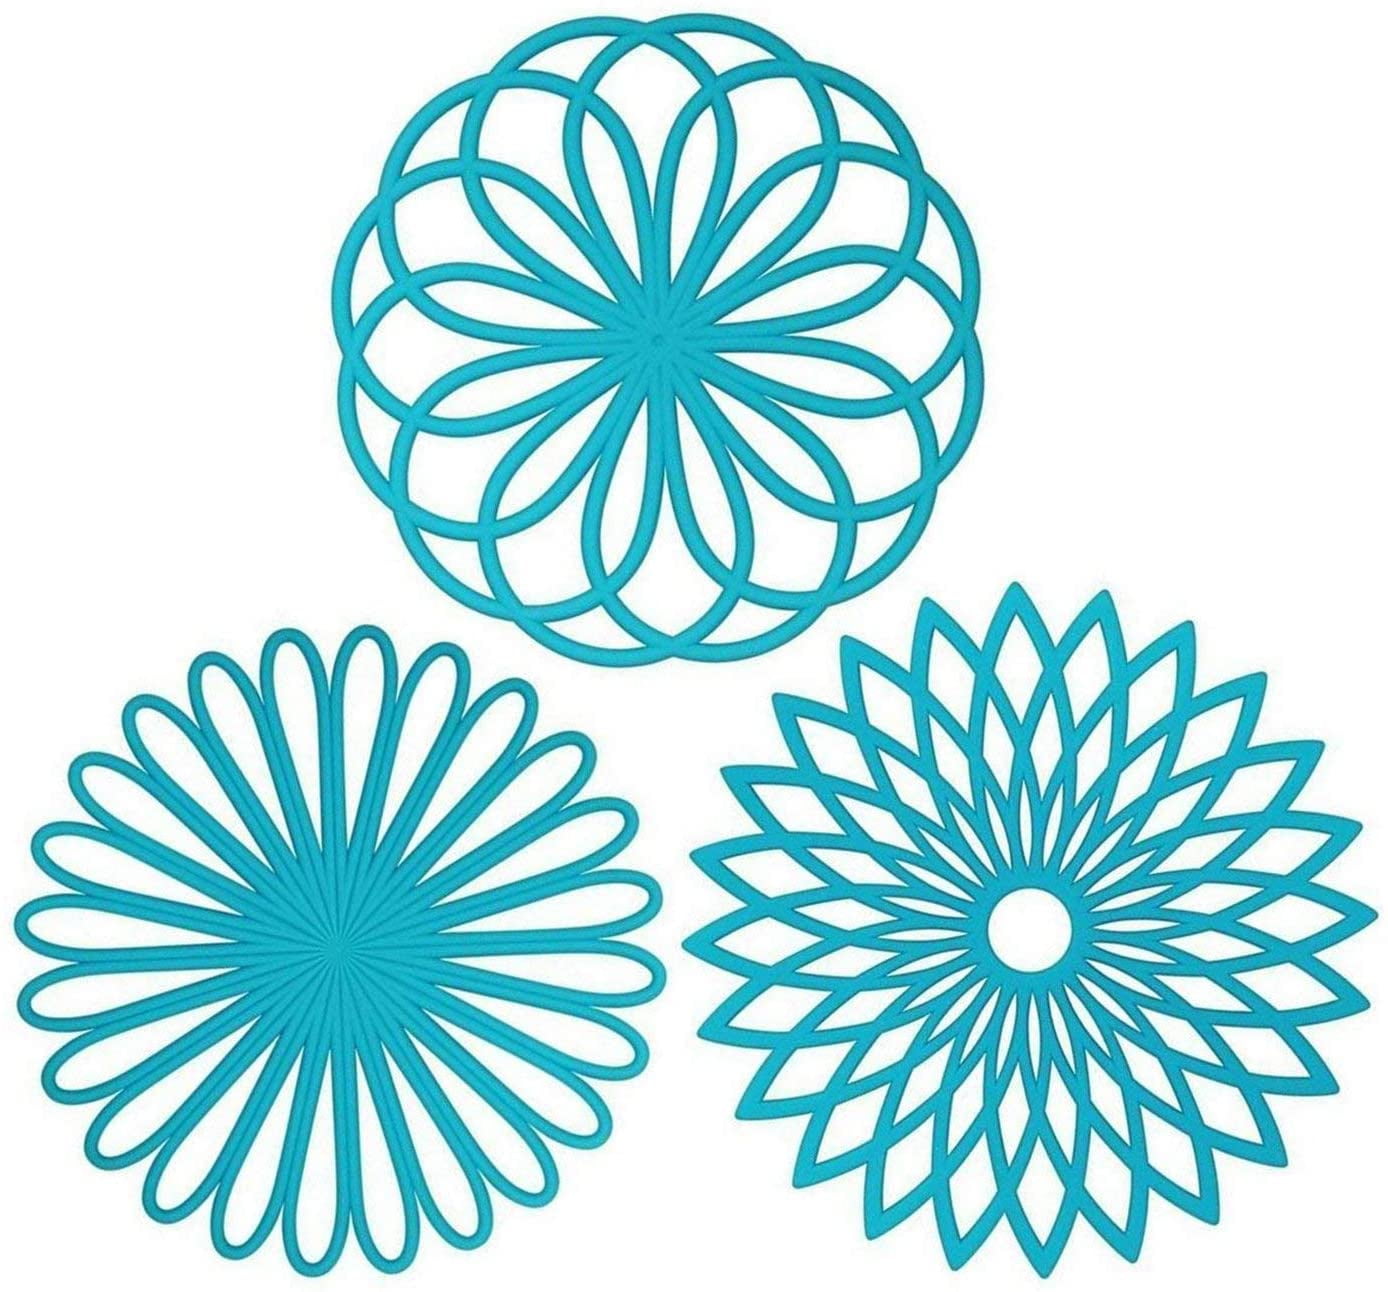 Light Blue 3 Set Silicone Trivet Mats With 1 Extra Large Included Intricately Carved Insulated Flexible Durable Non Slip Thick Round Premium Trivets for Hot pots and pans 